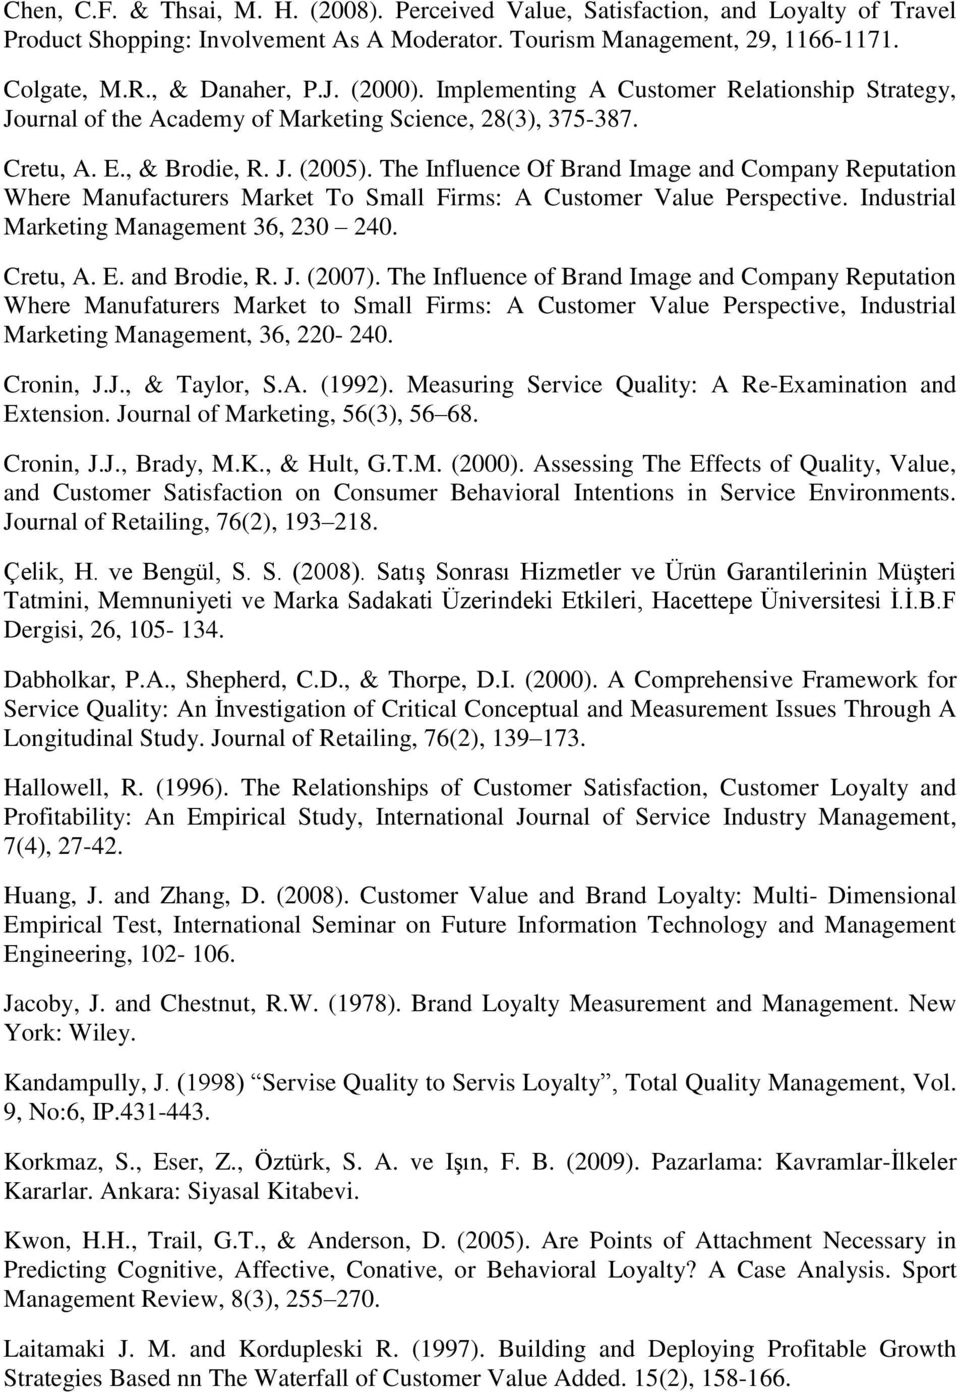 The Influence Of Brand Image and Company Reputation Where Manufacturers Market To Small Firms: A Customer Value Perspective. Industrial Marketing Management 36, 230 240. Cretu, A. E. and Brodie, R. J.